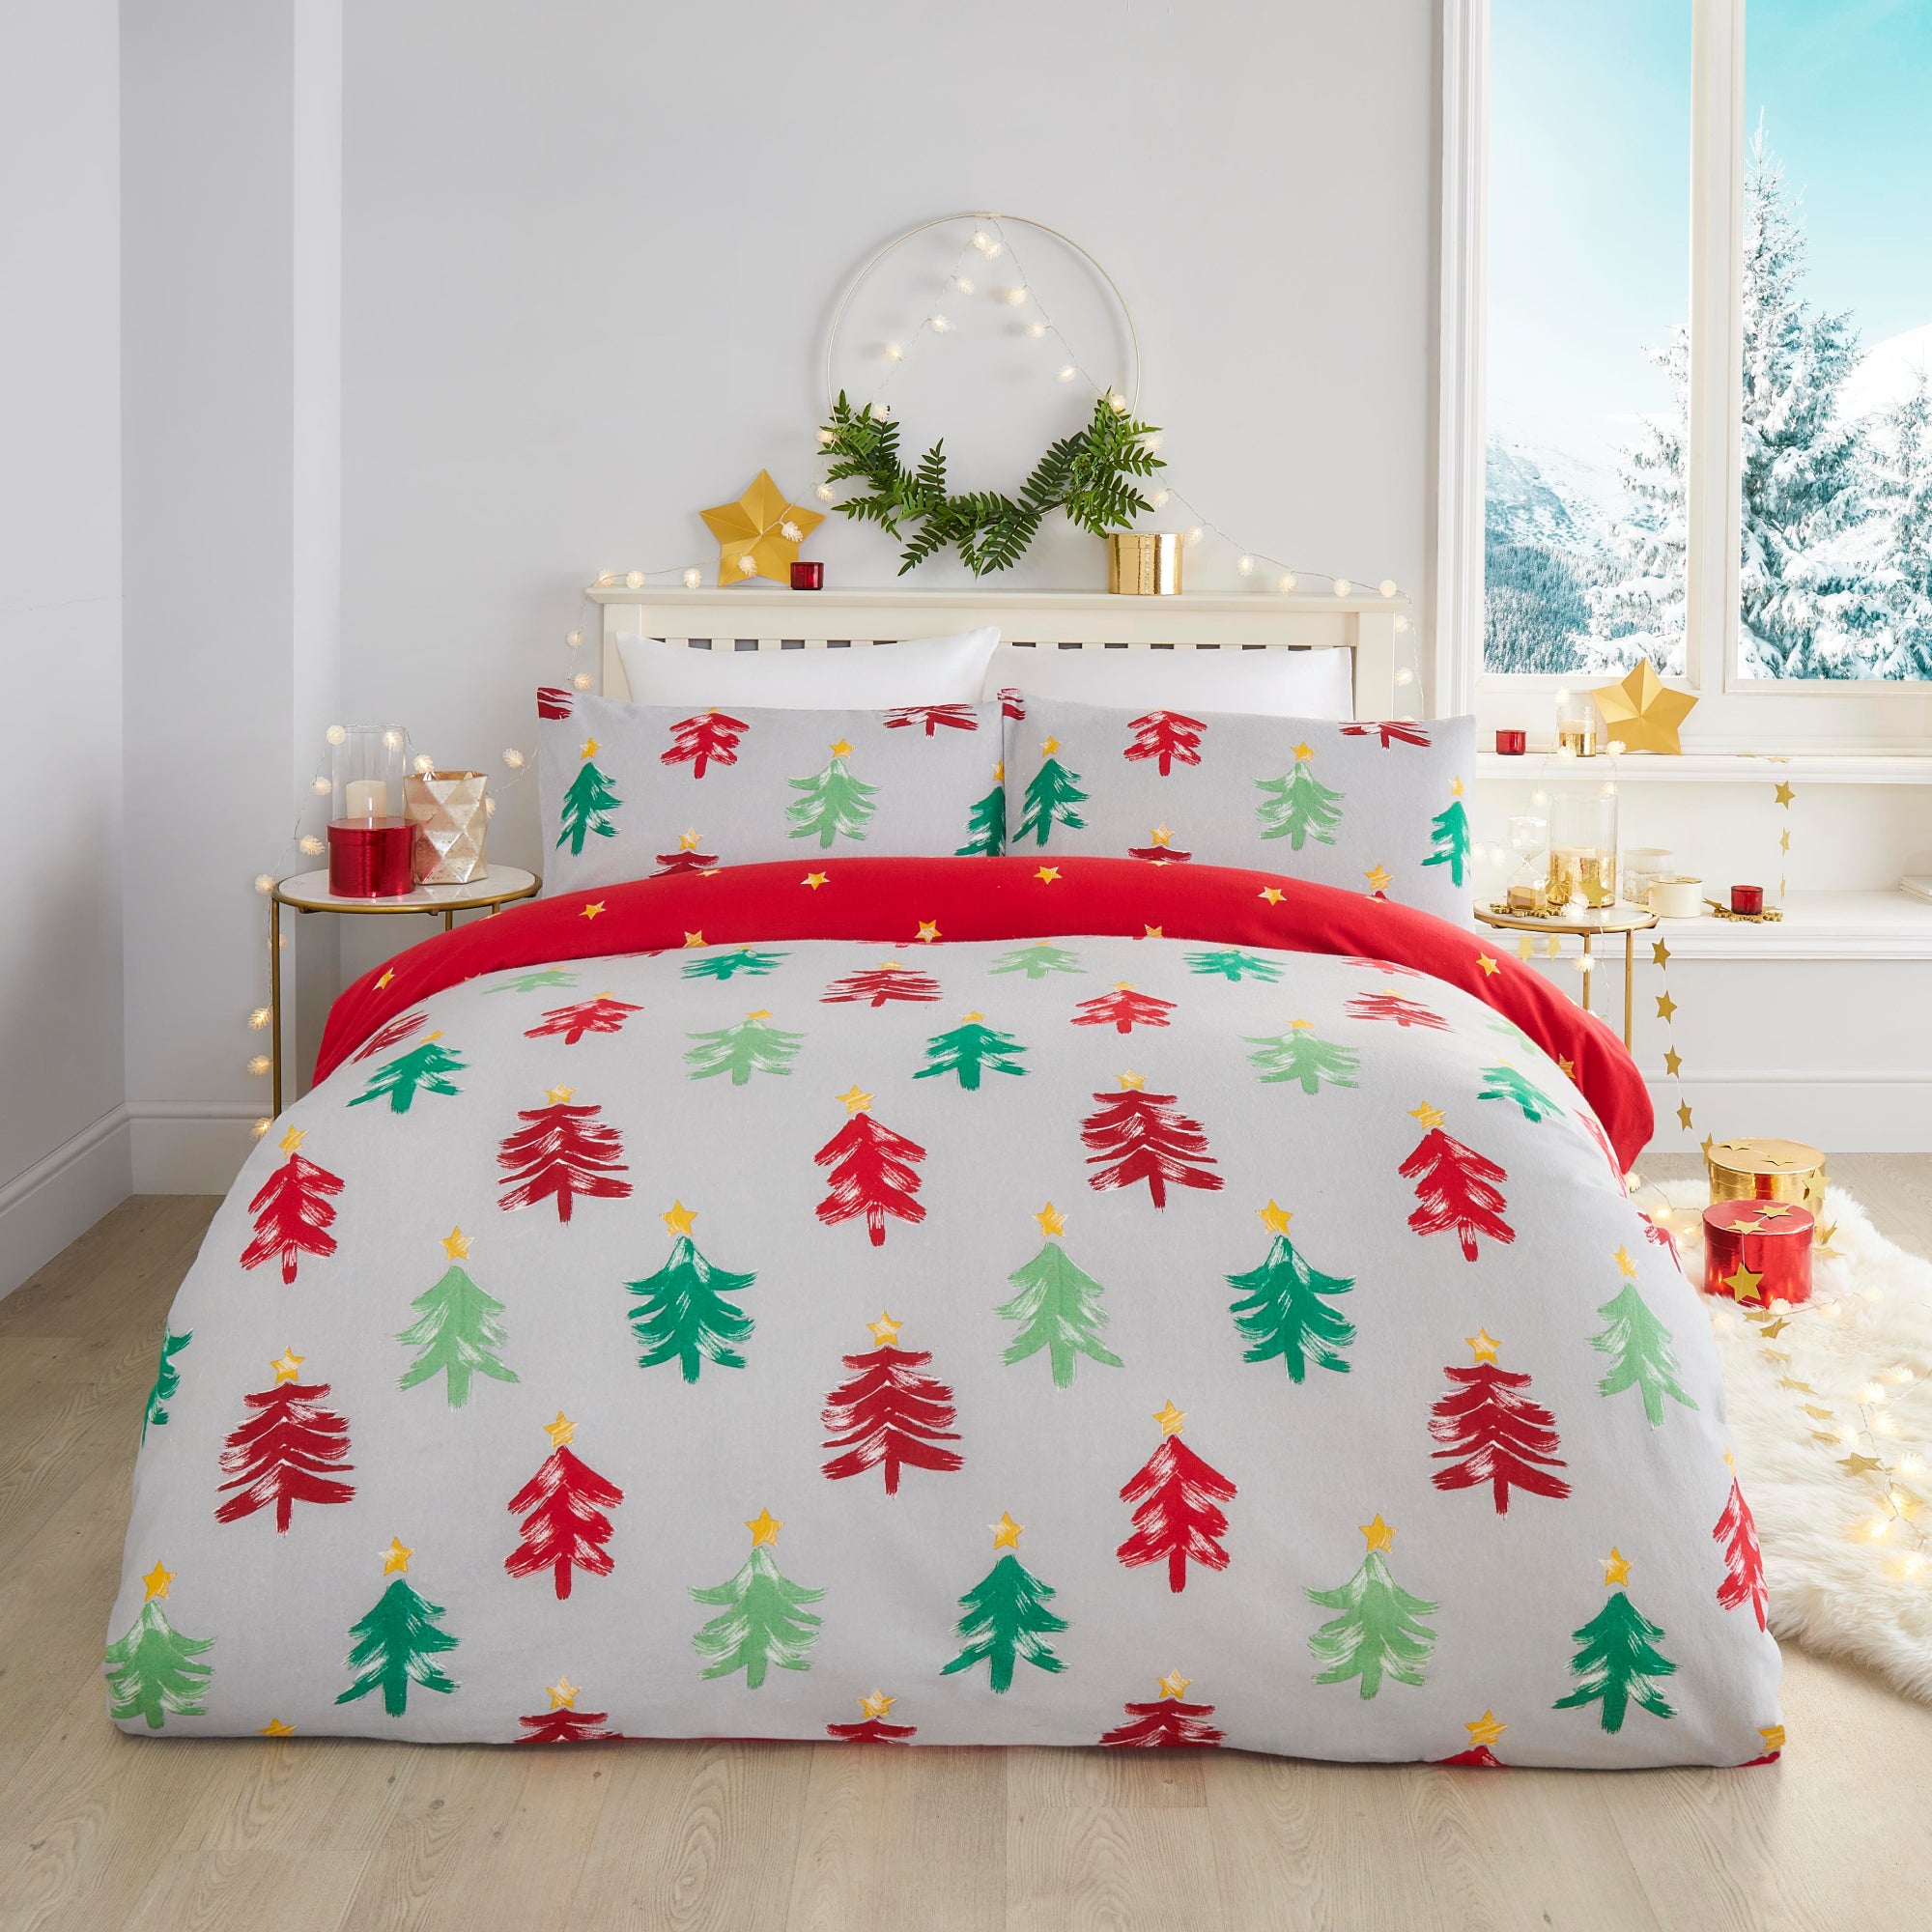 Duvet Cover Set Festive Trees by Fusion Christmas in Grey